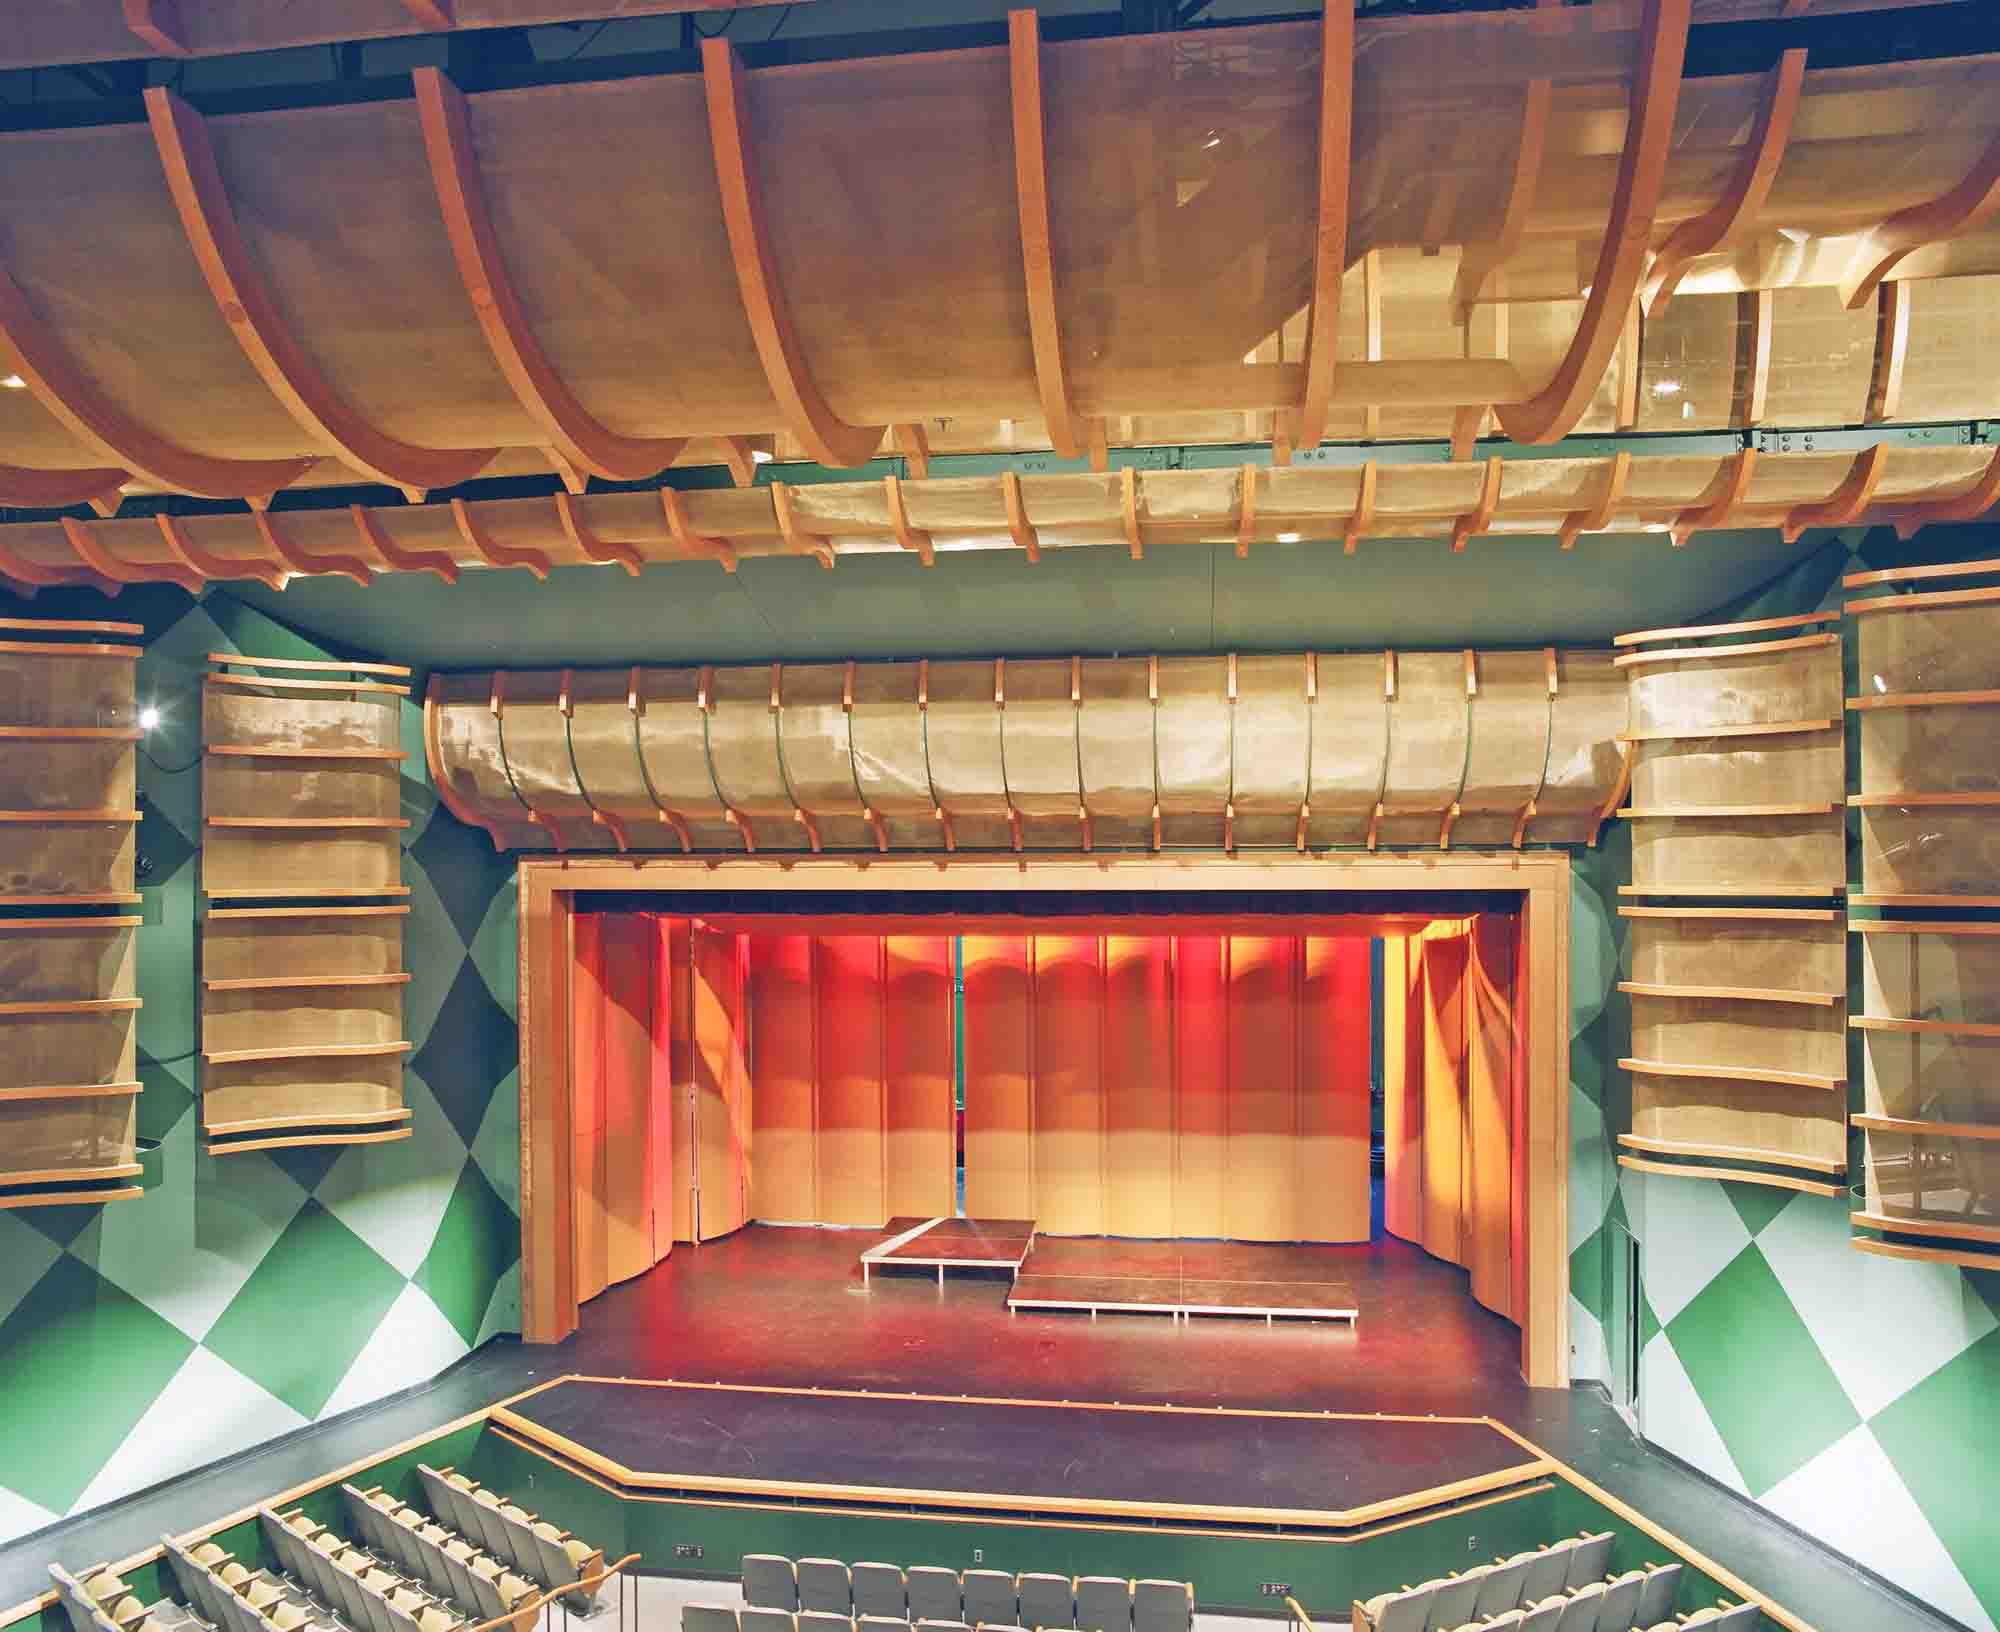 The center of Roosevelt High School Theater's main stage with seating up front.